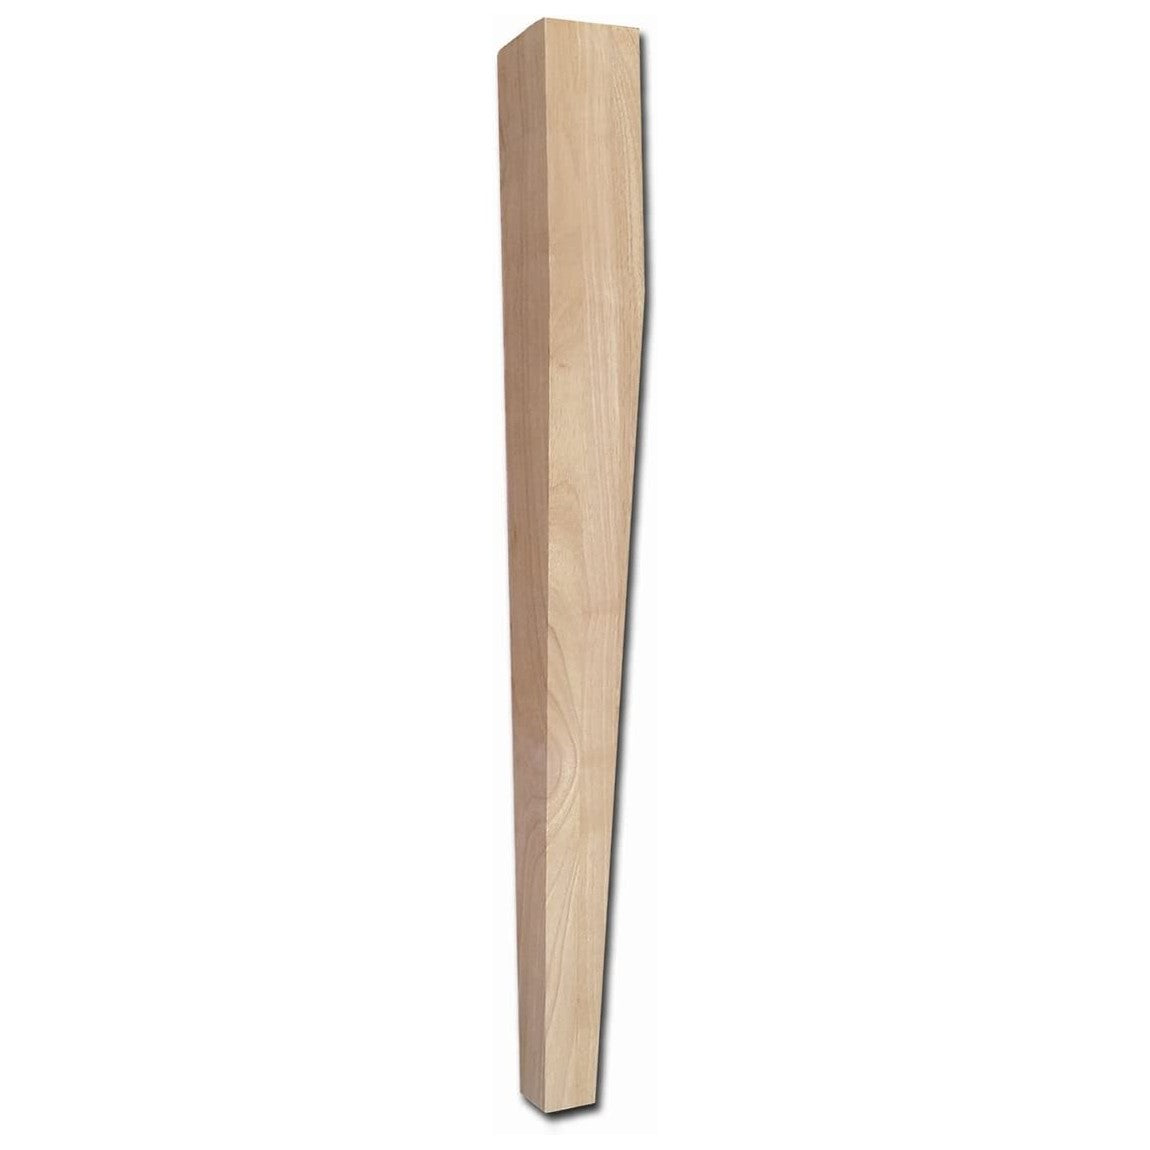 Long Tapered Leg 35-1/4" Tall x 3-1/2" Square